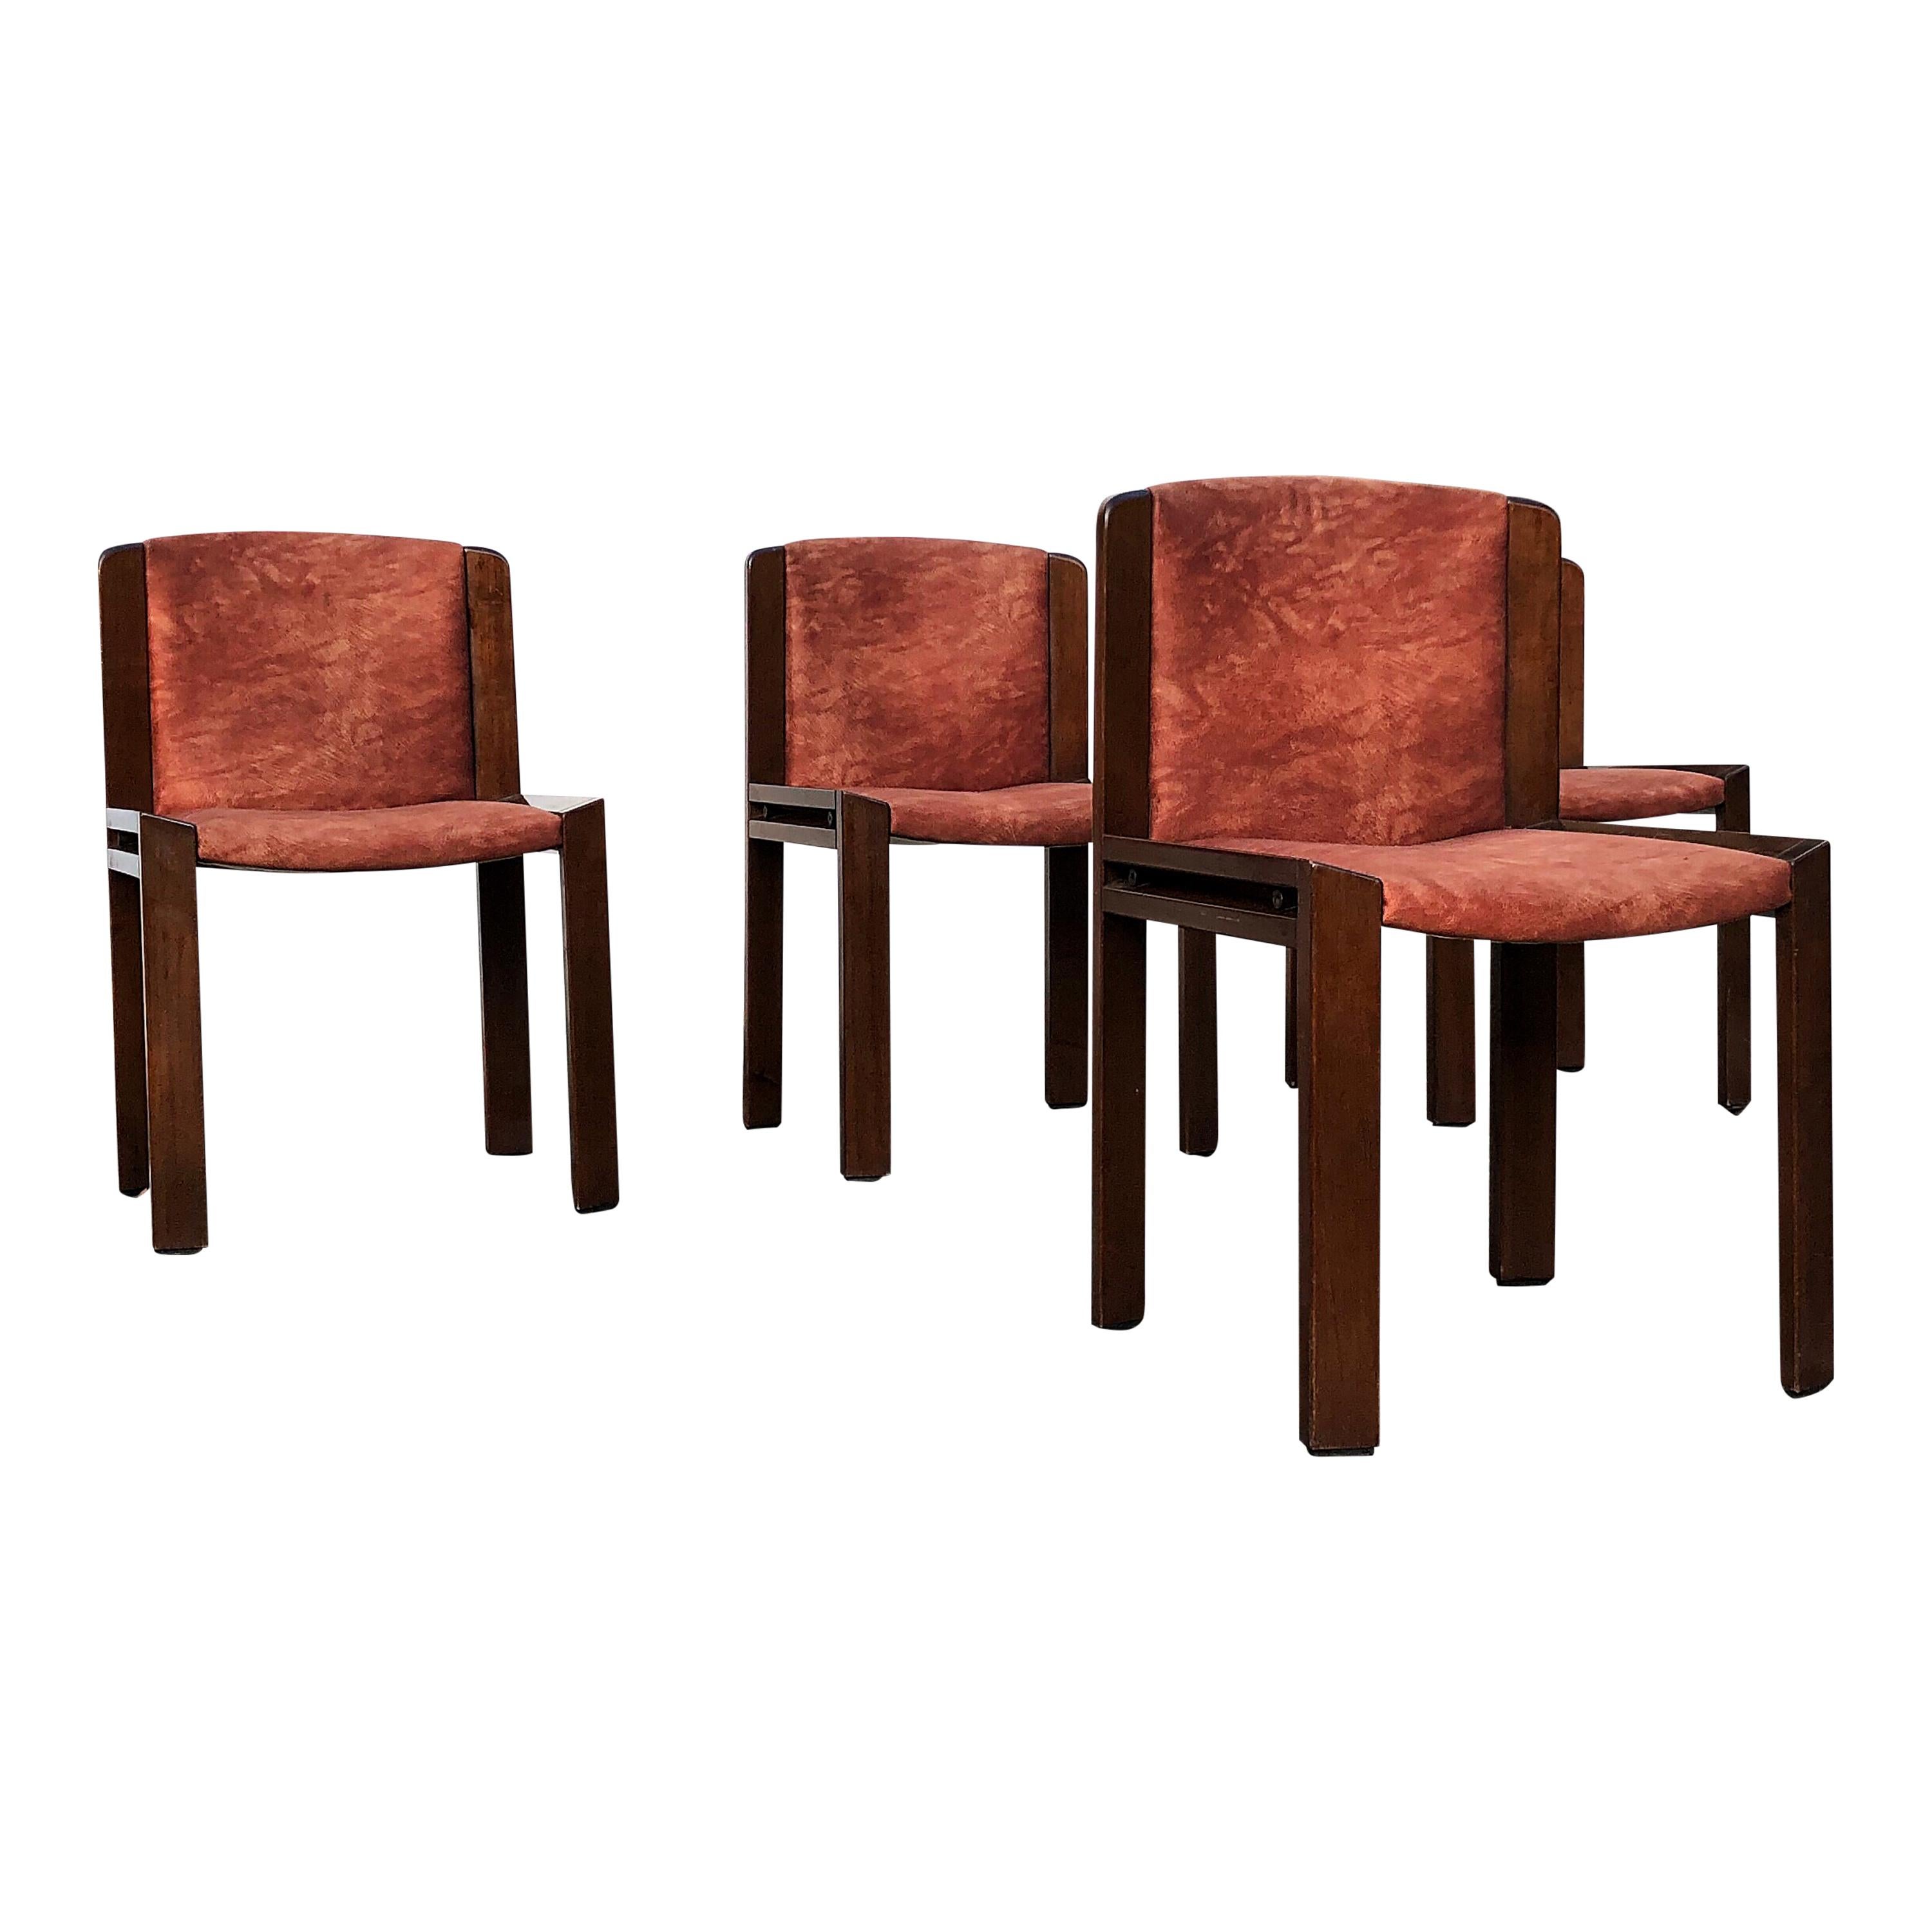 Four chairs model 